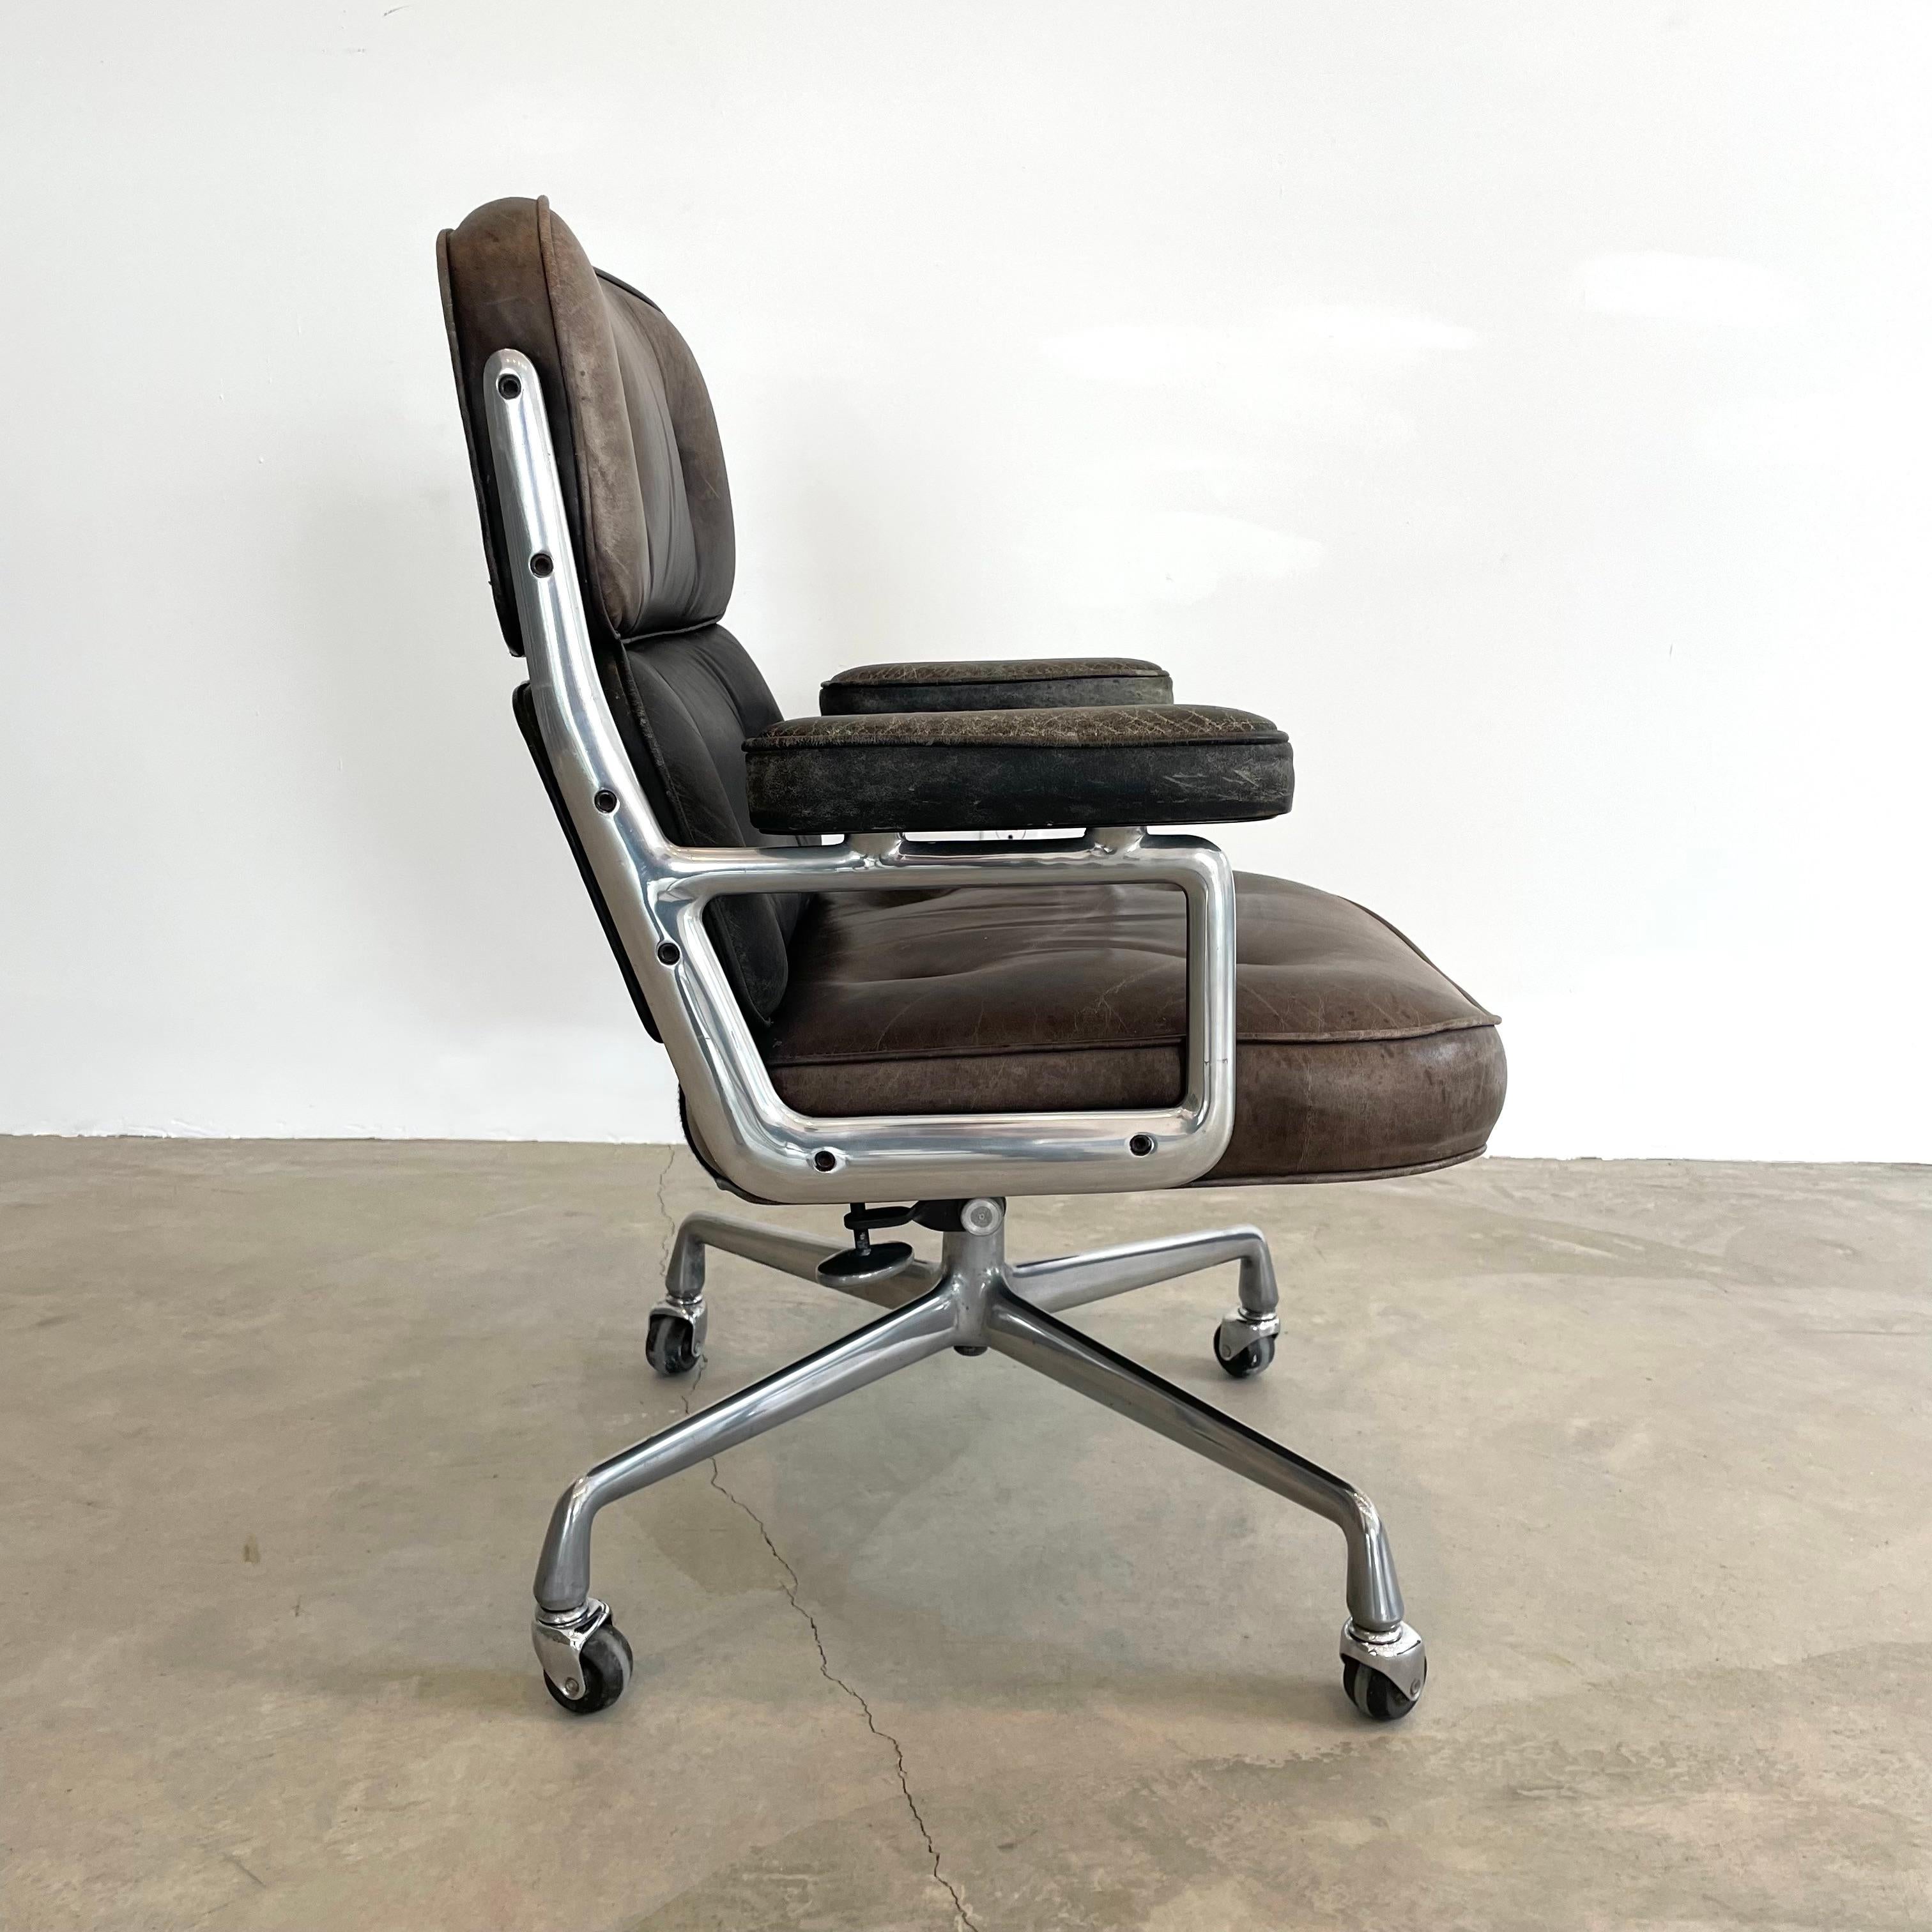 Classic Eames Time Life swivel chair in brown and black leather for Herman Miller. Original two tone chair with alternating brown and black leather, with wear as shown. Metal in good condition. Extremely comfortable and worn in. Chair swivels. Chair